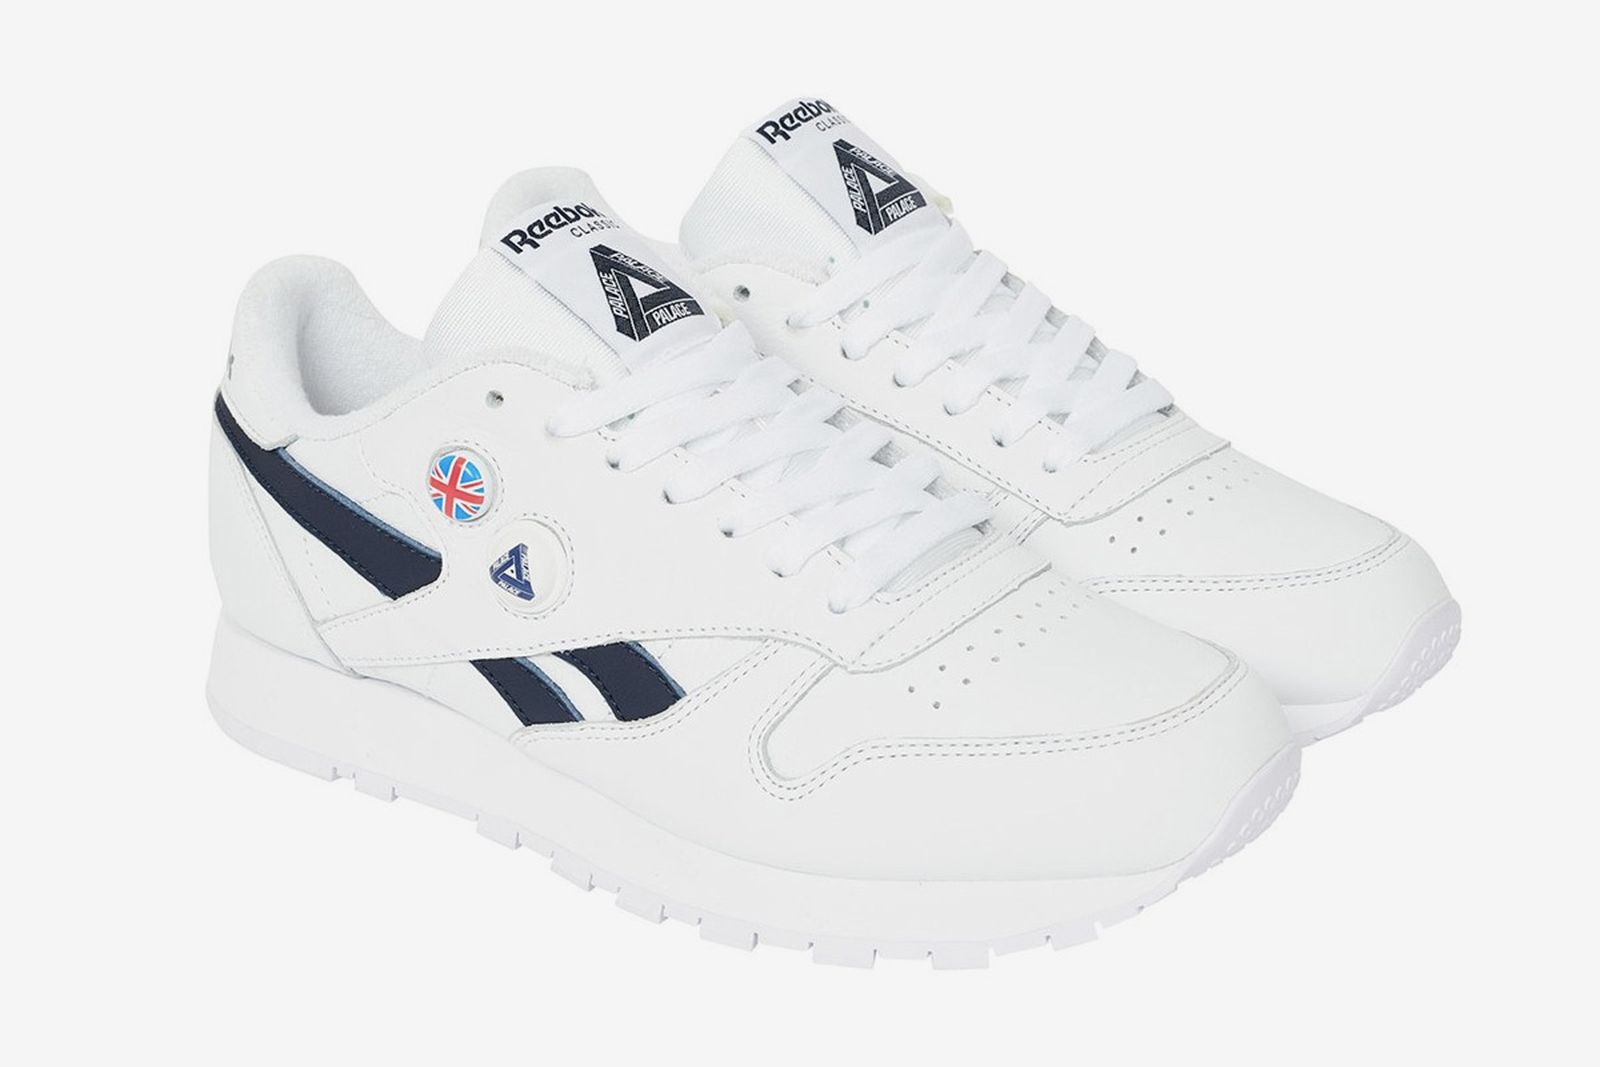 palace-reebok-classic-leather-pump-release-date-price-01